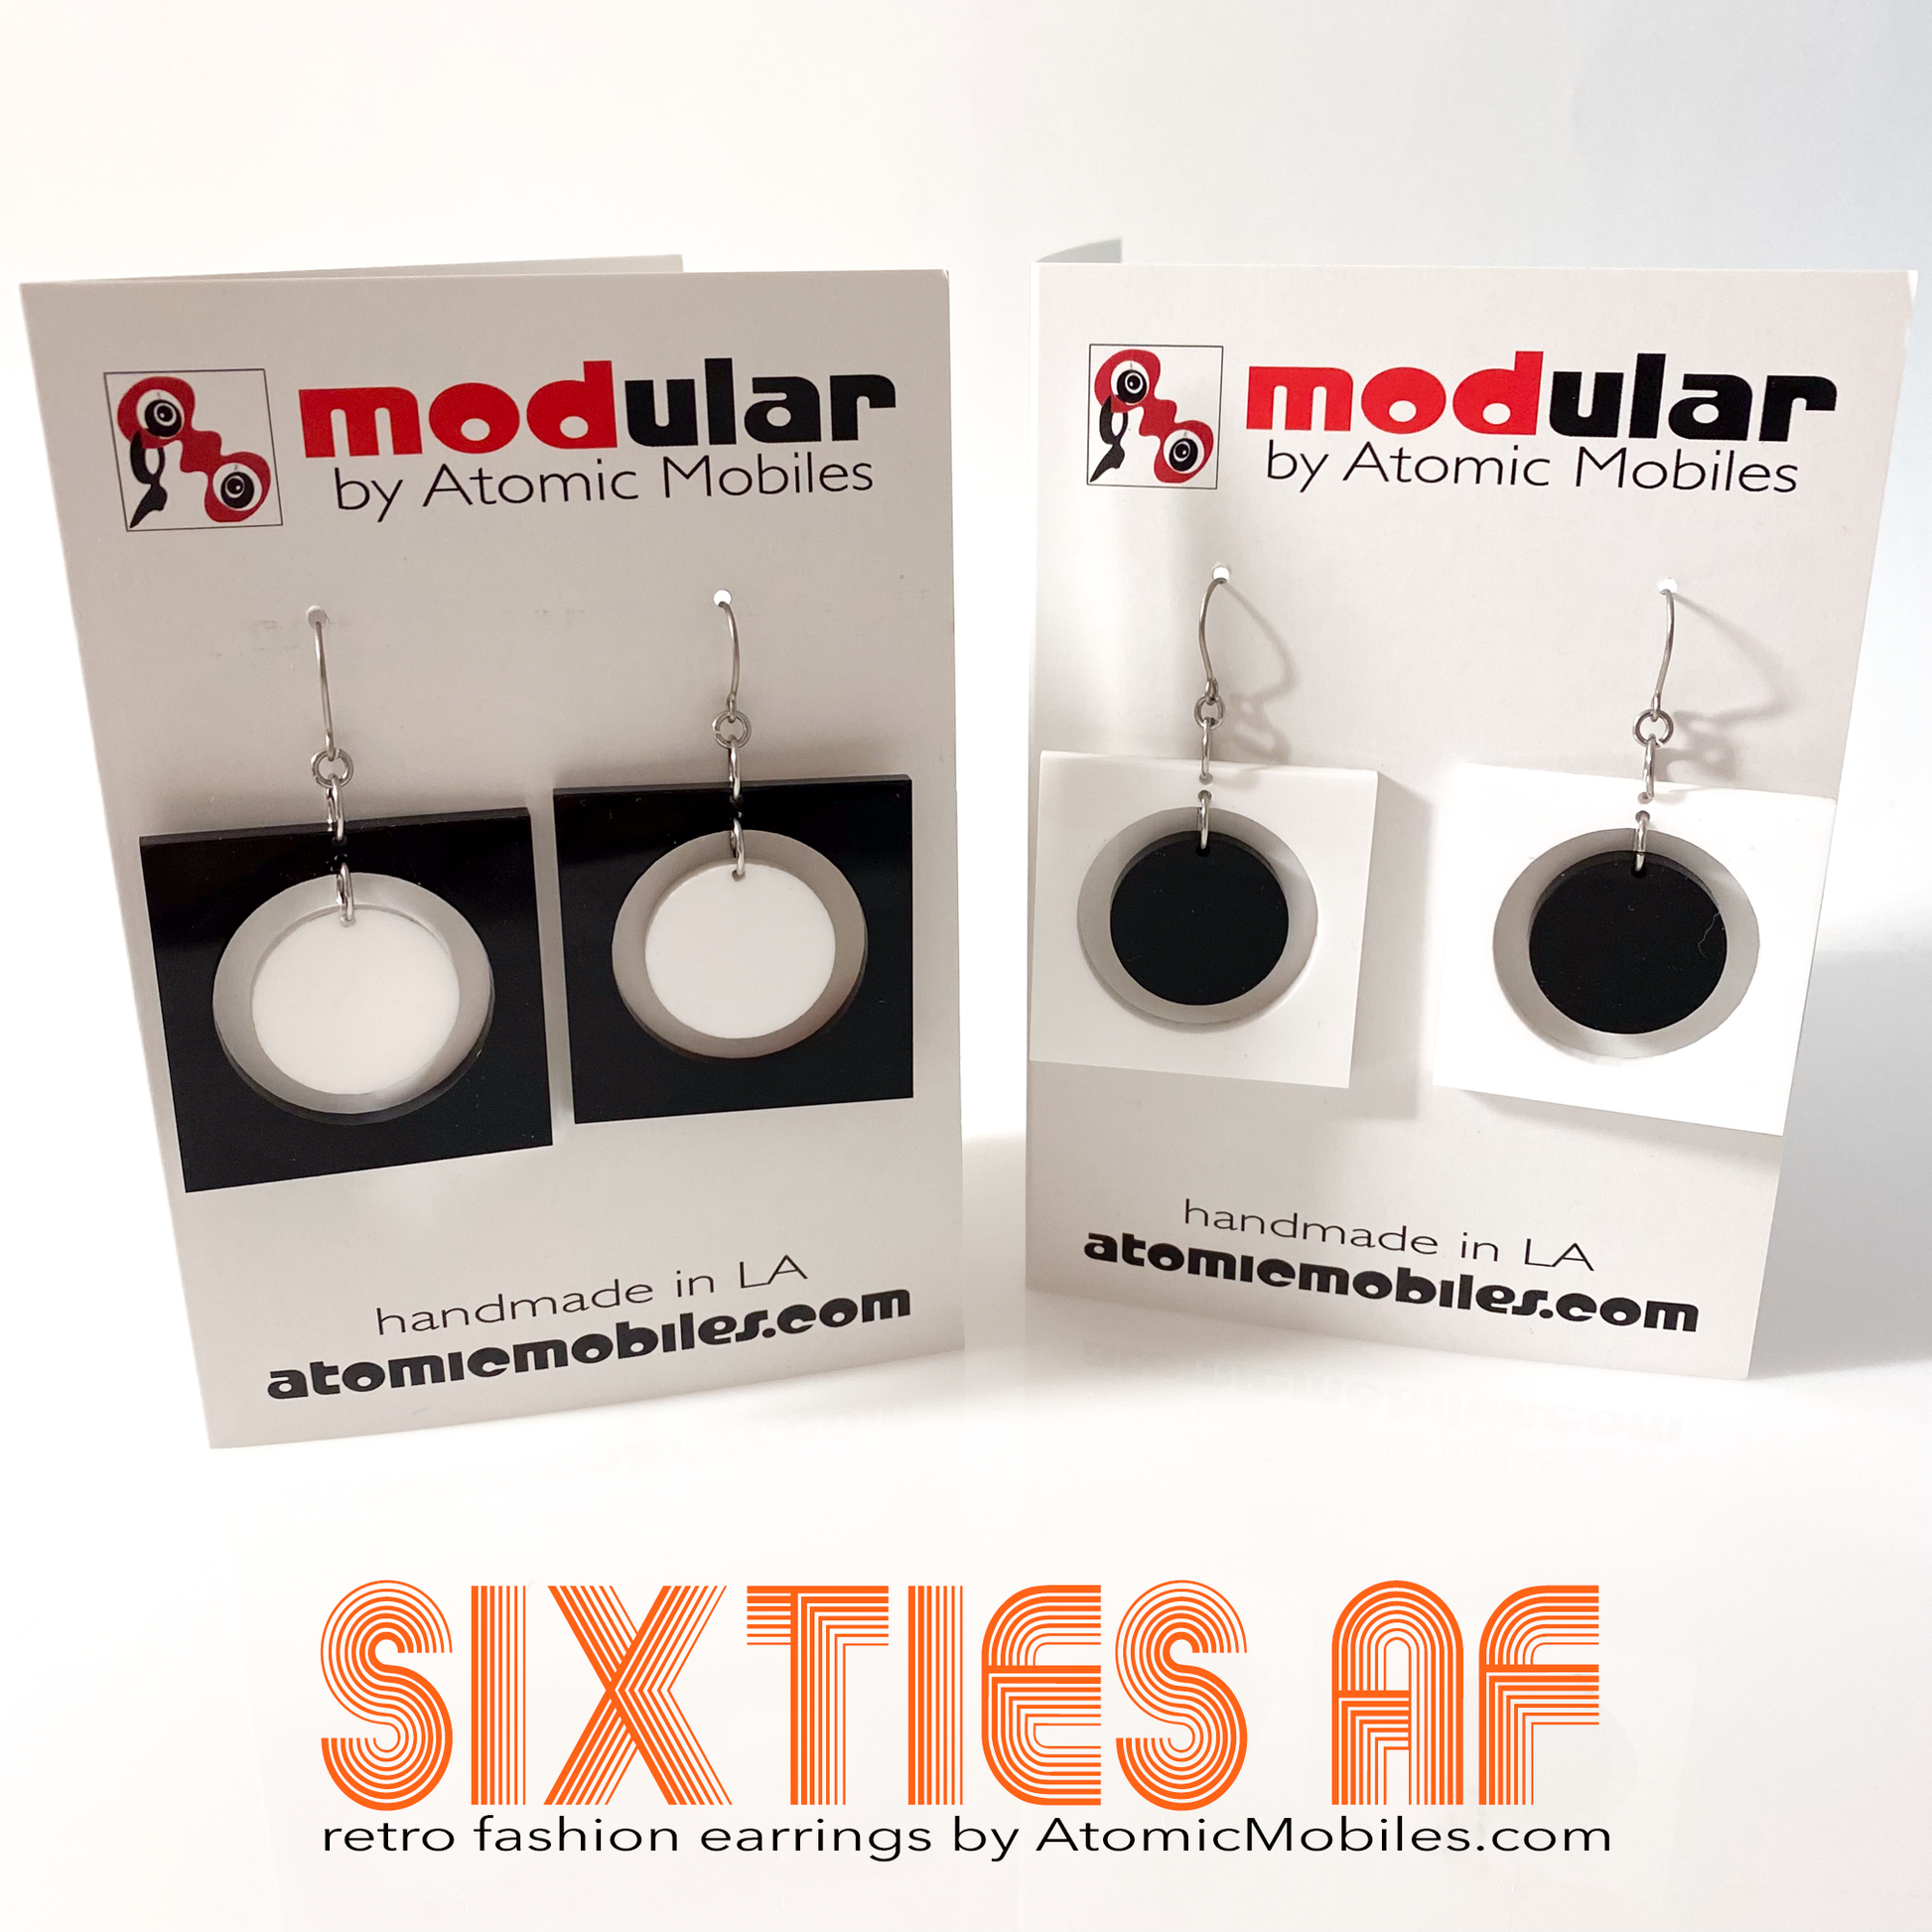 Groovy SIXTIES AF fashion statement earrings inspired by retro mid century modern 1960s style - available in 2 colorways -  by AtomicMobiles.com